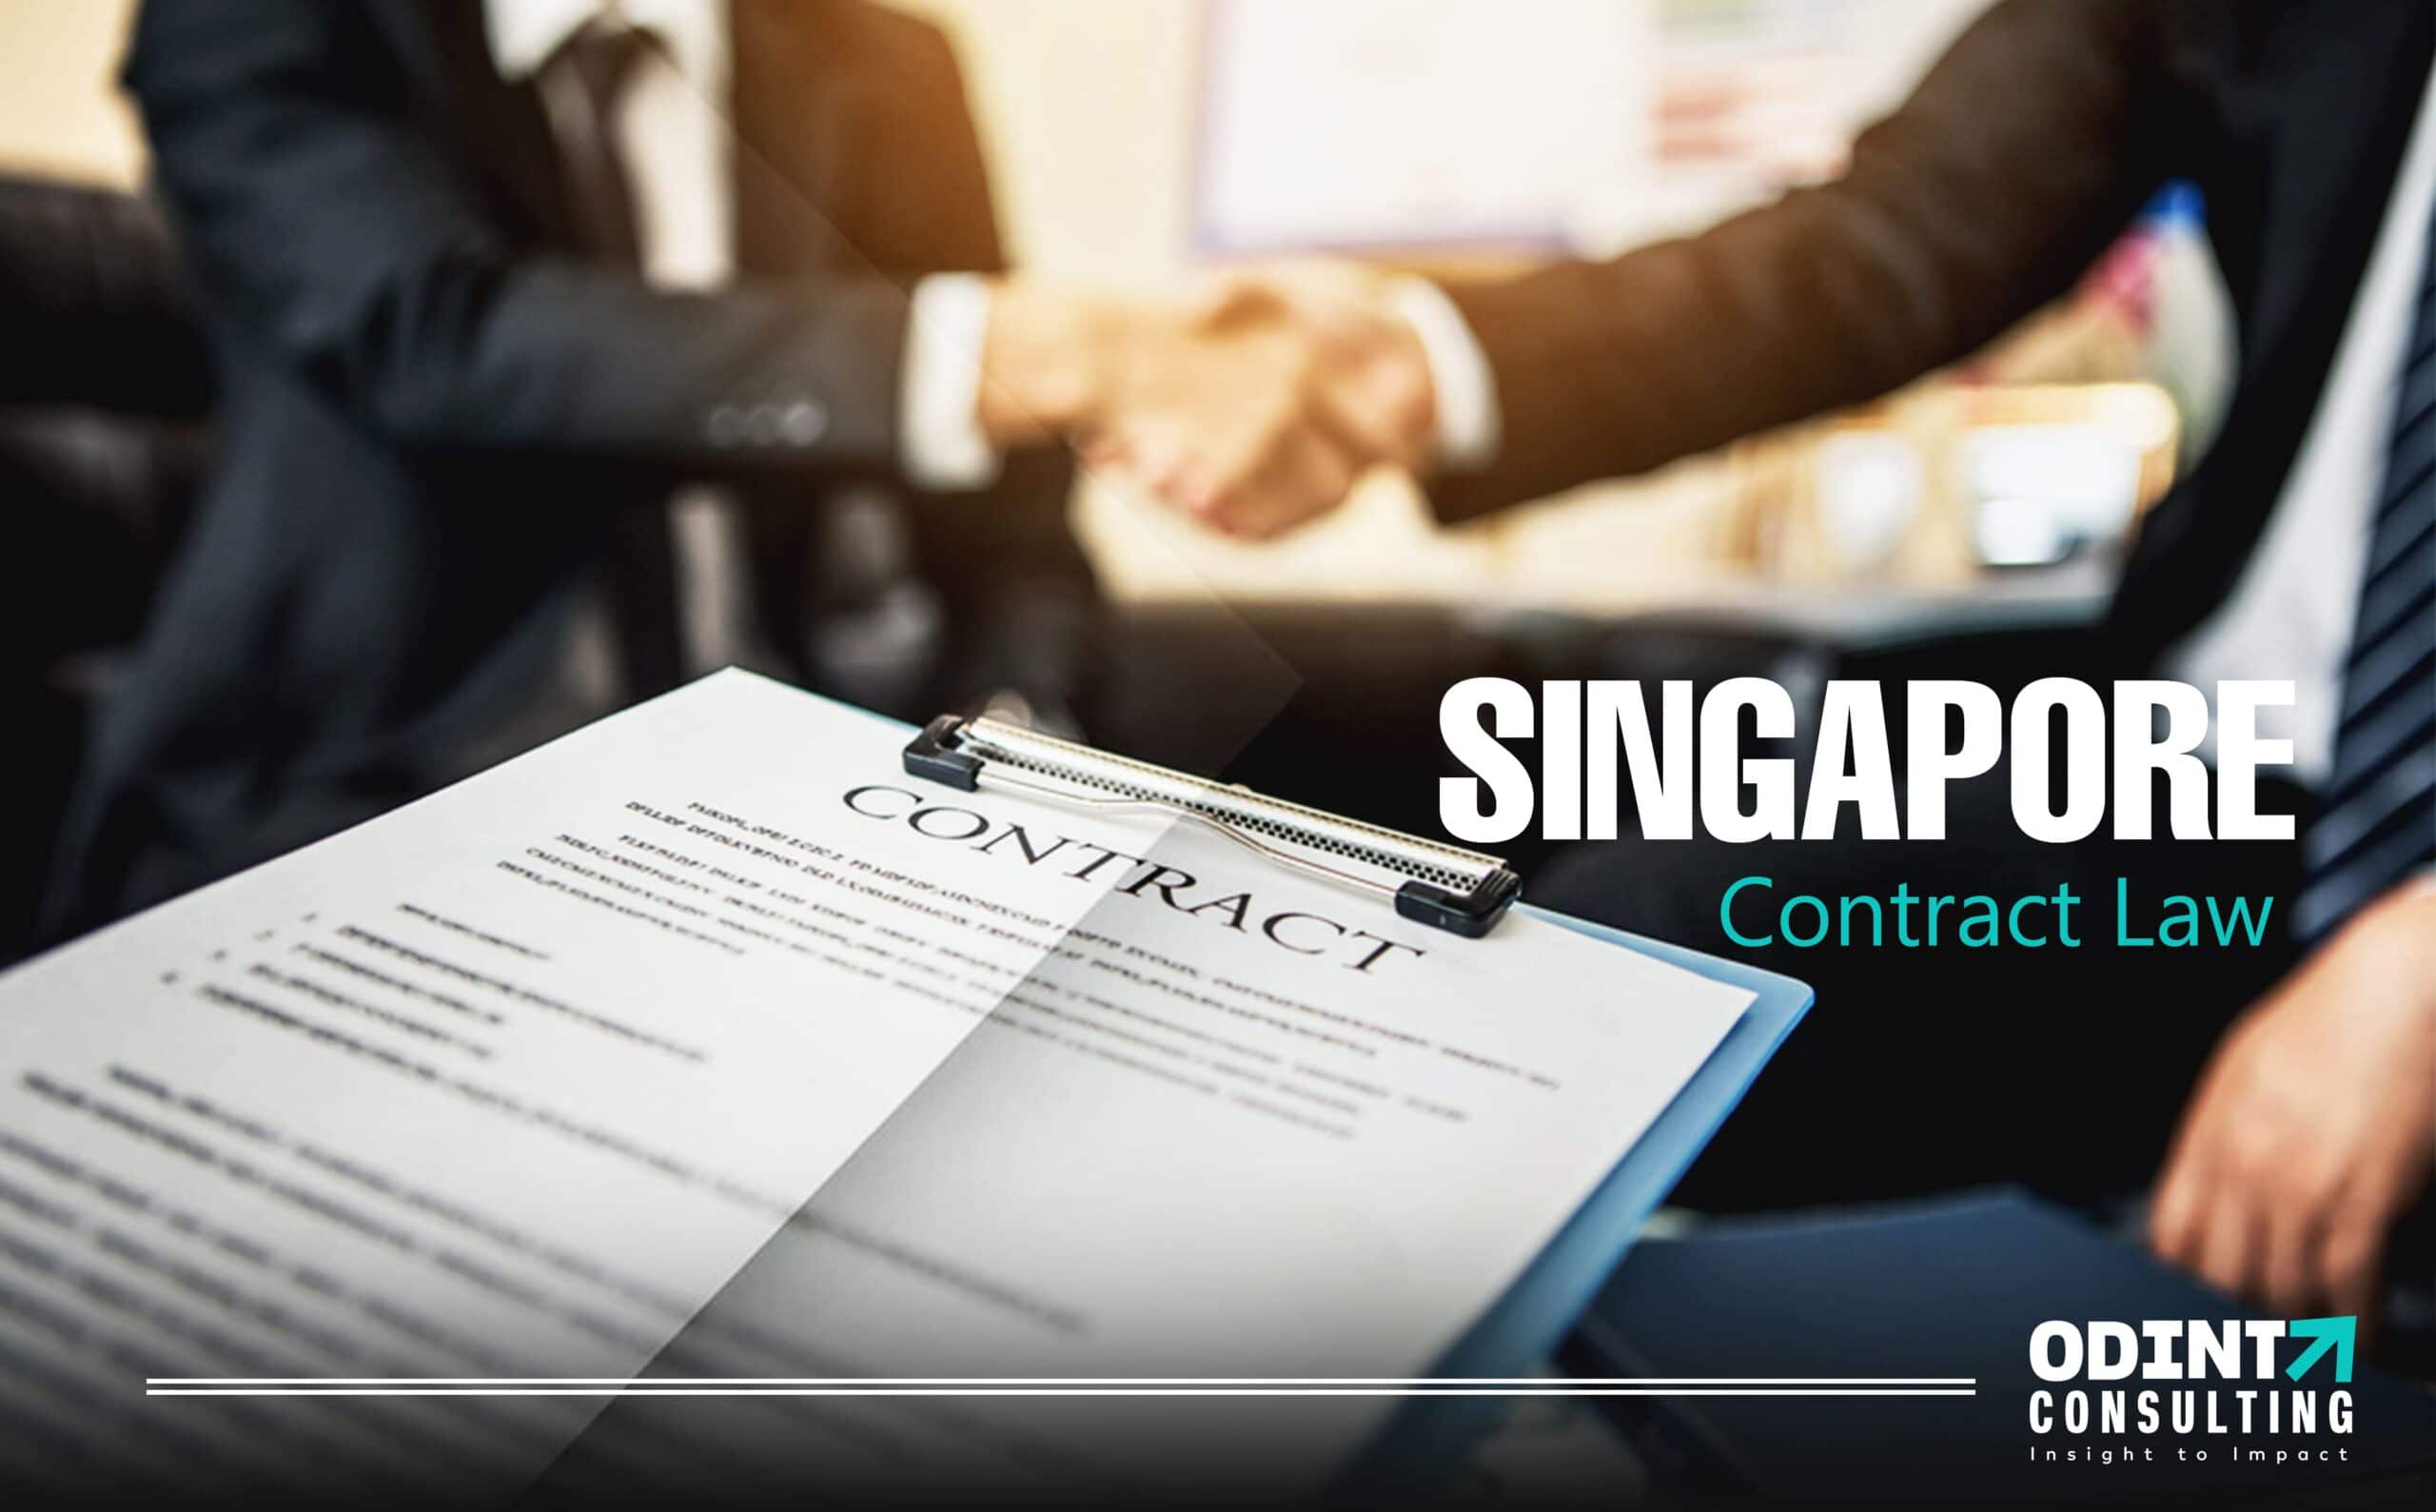 Singapore Contract Law: Features & Structured Dispute Resolution